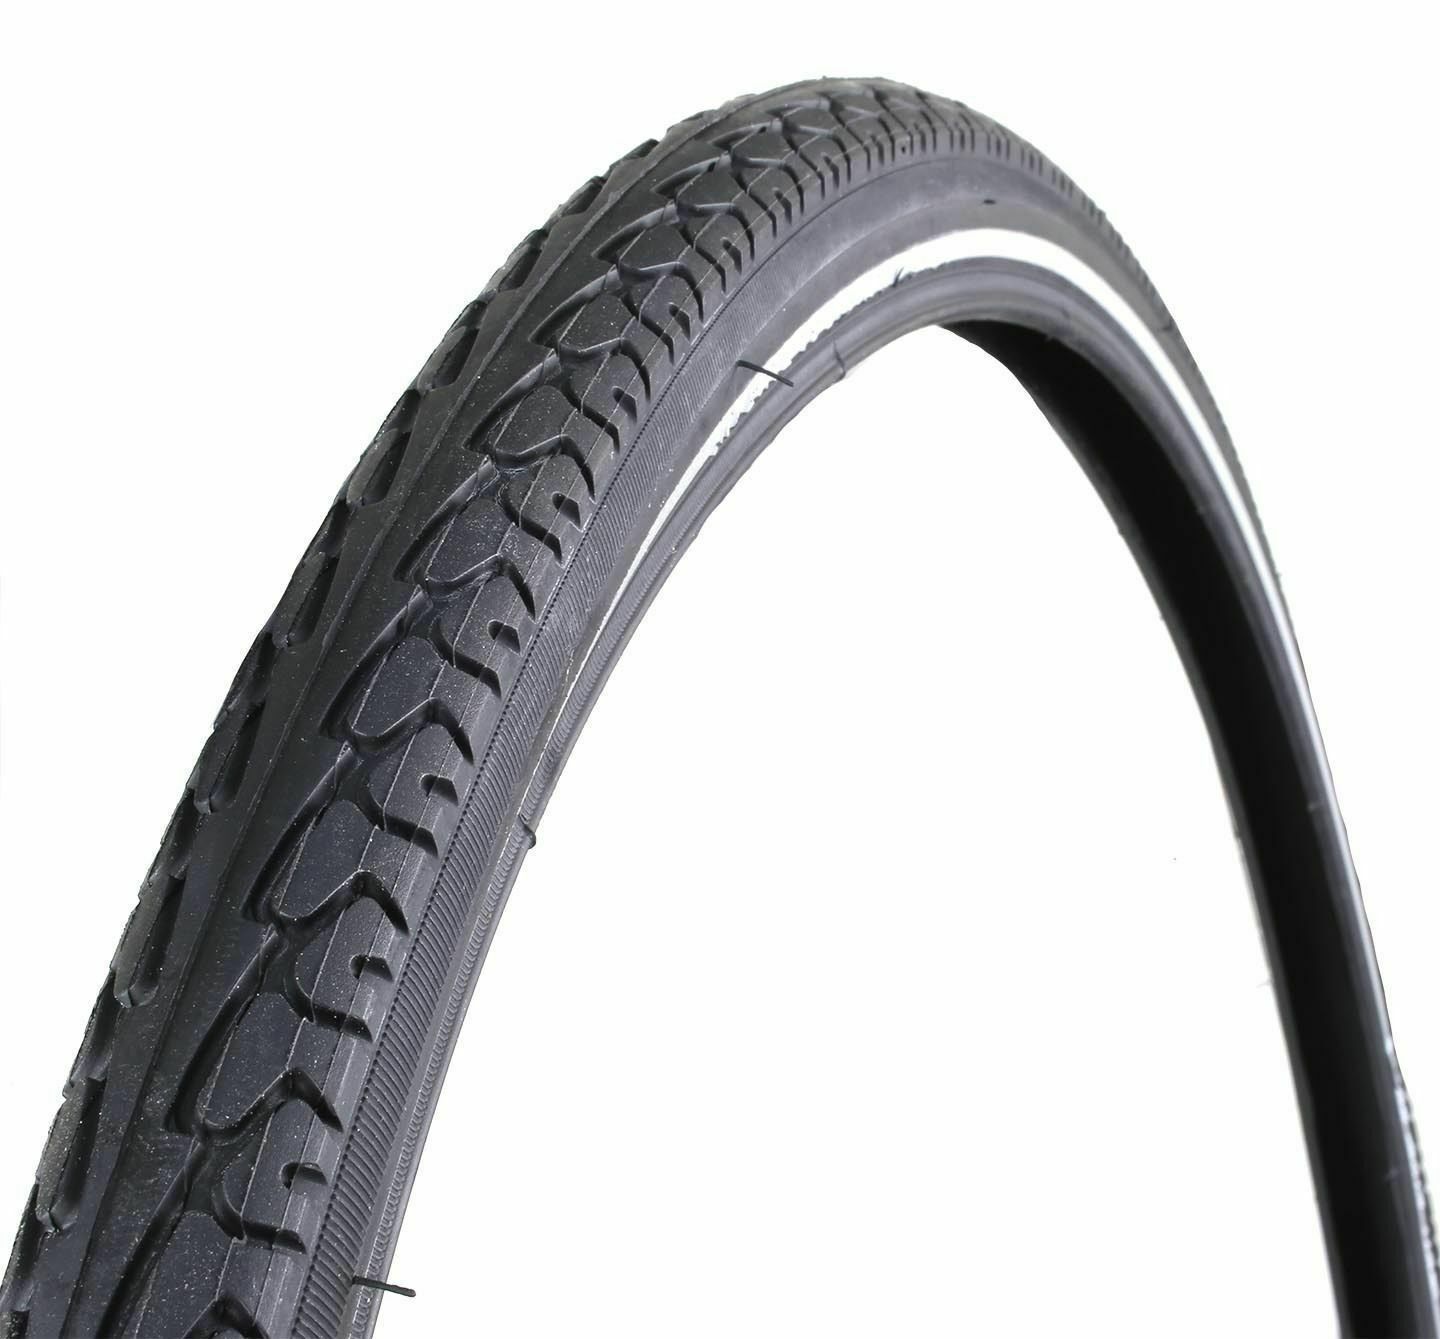 700 x 35c tires in inches